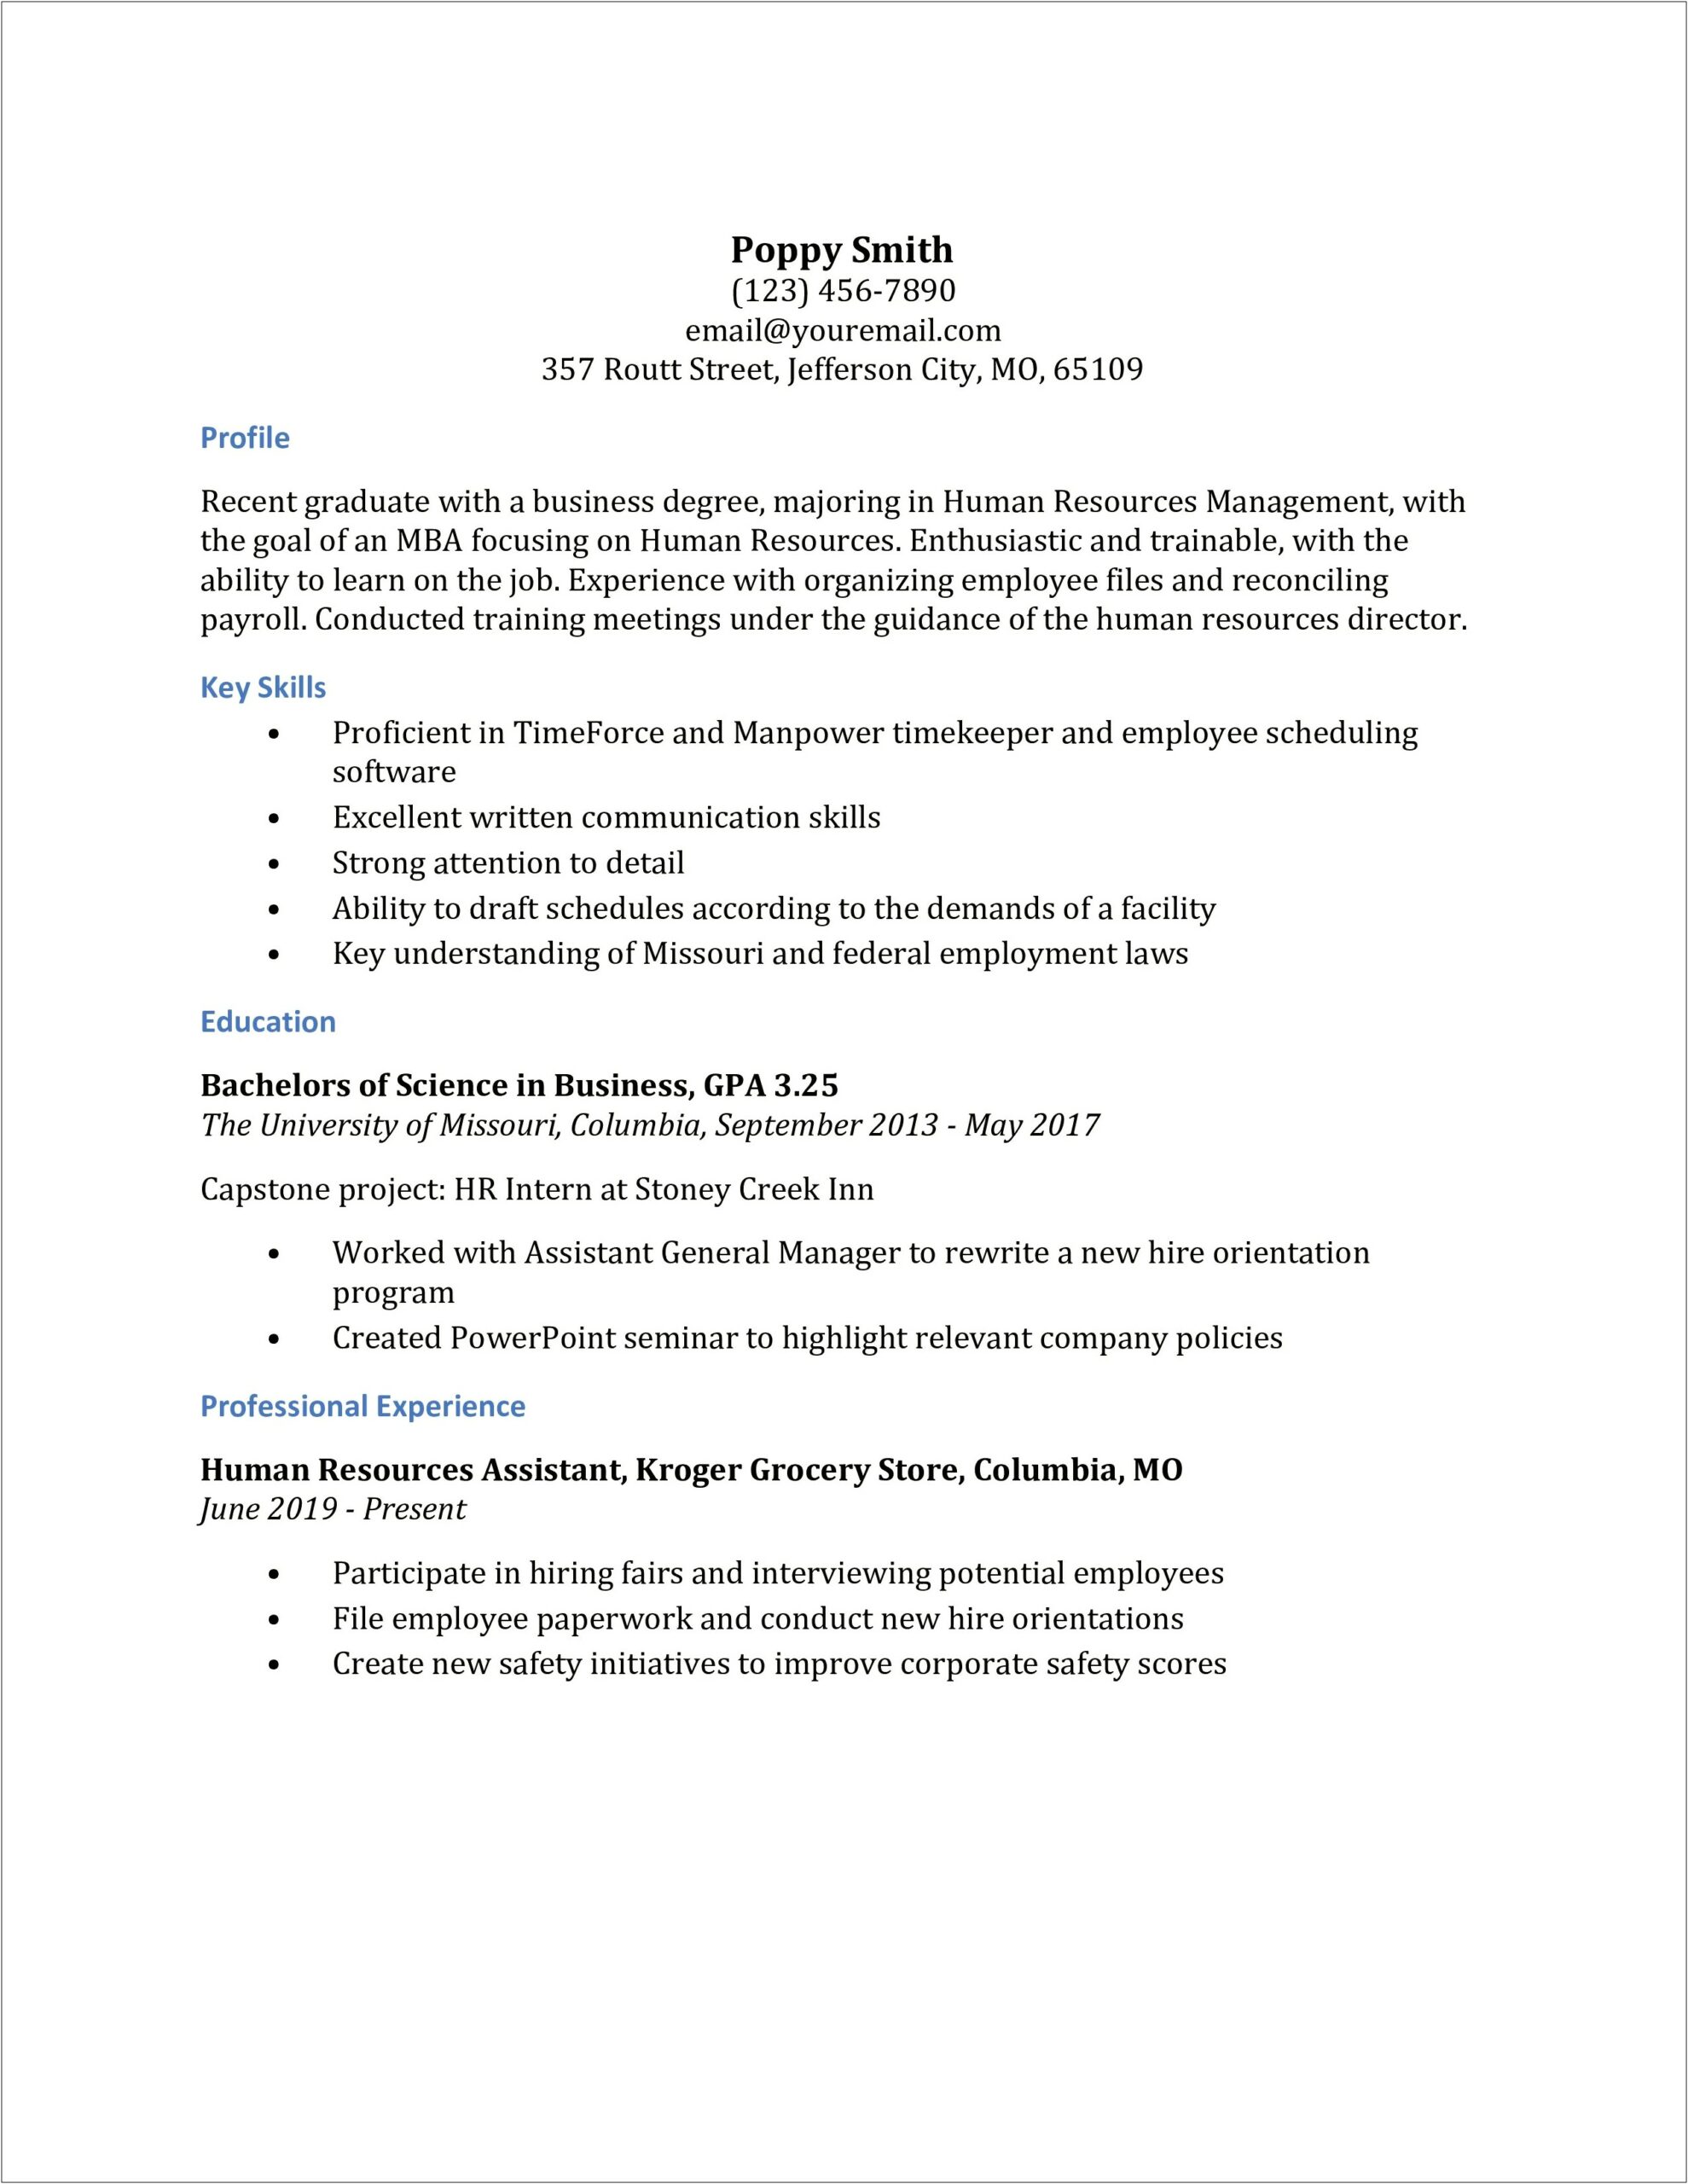 Project Management Capstone Project In Resume